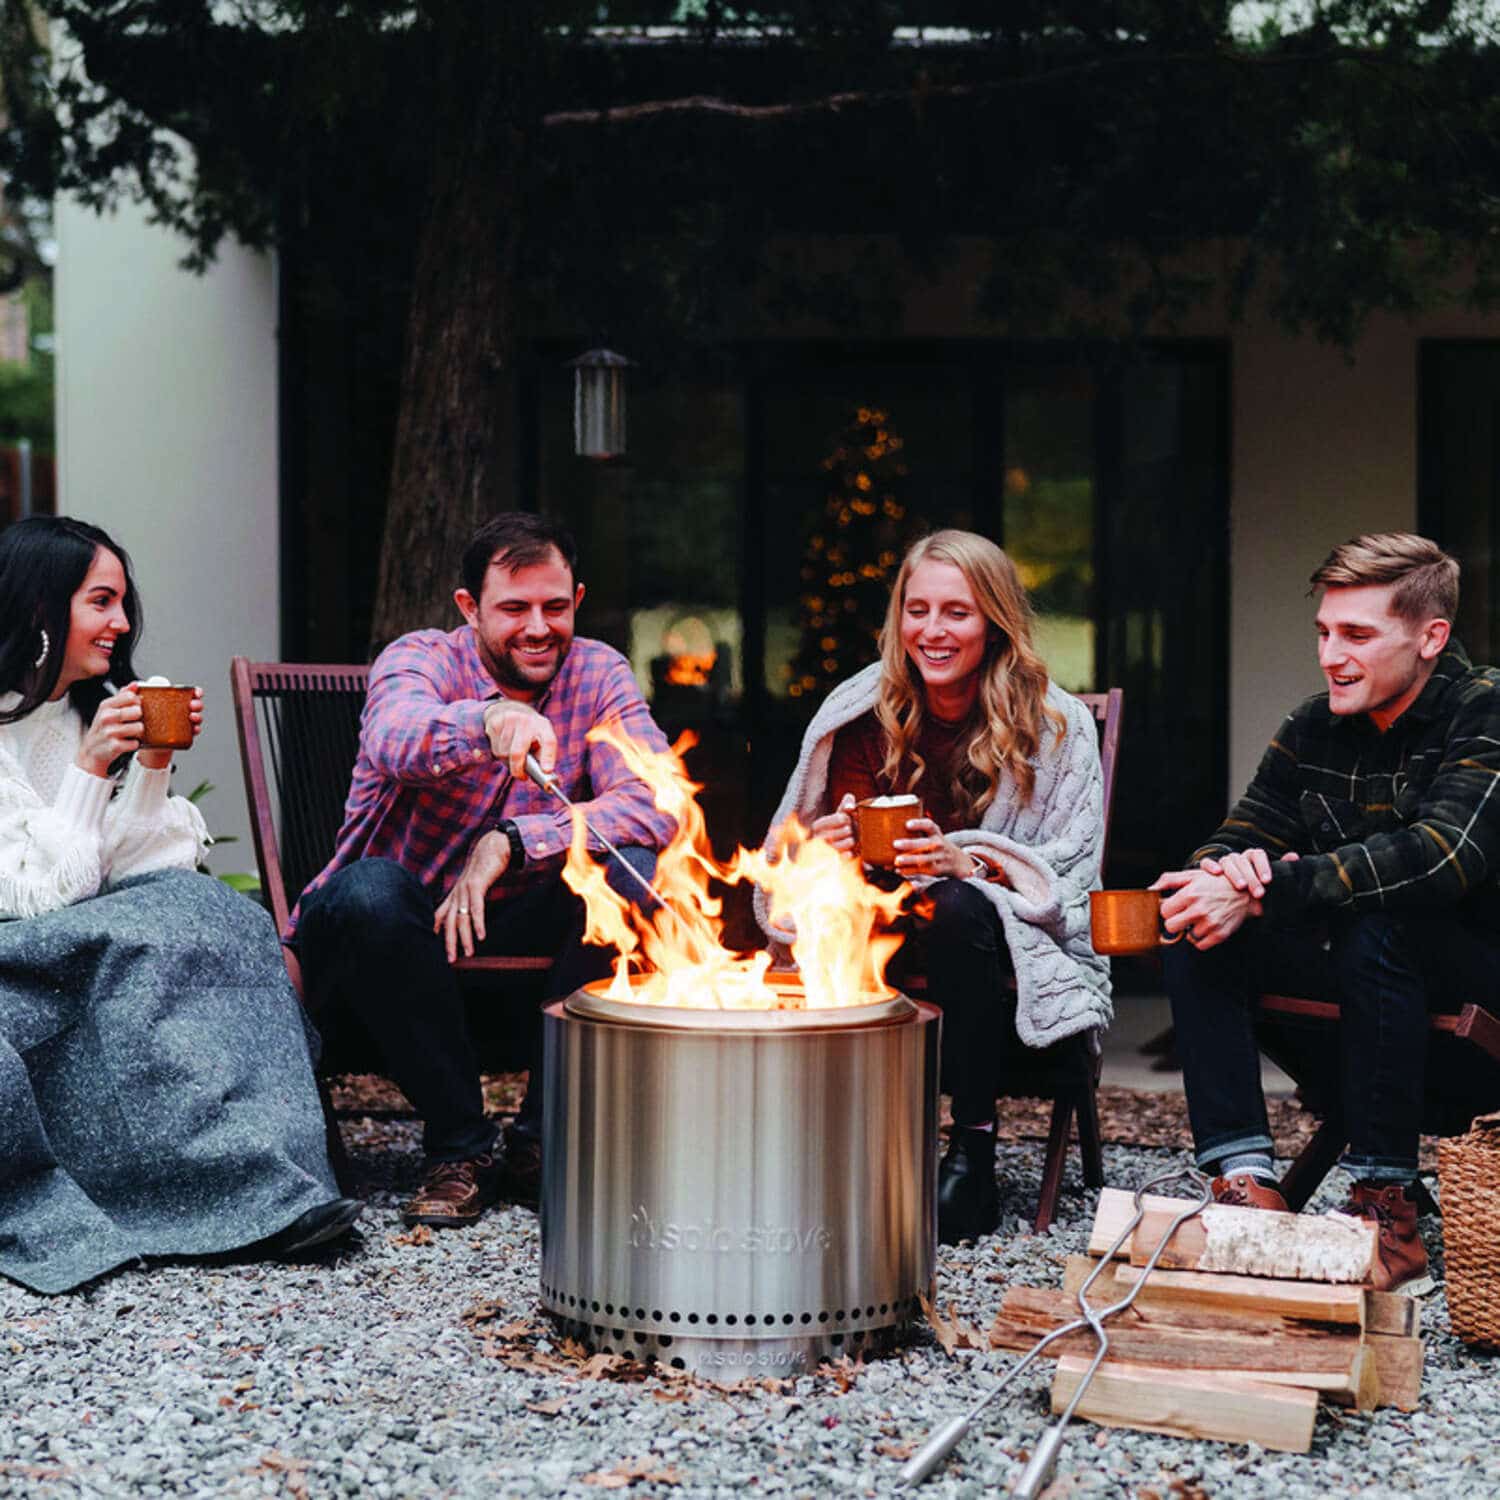 The Best Electric Fire Pit 2021 Is, Ace Hardware Outdoor Fire Pit